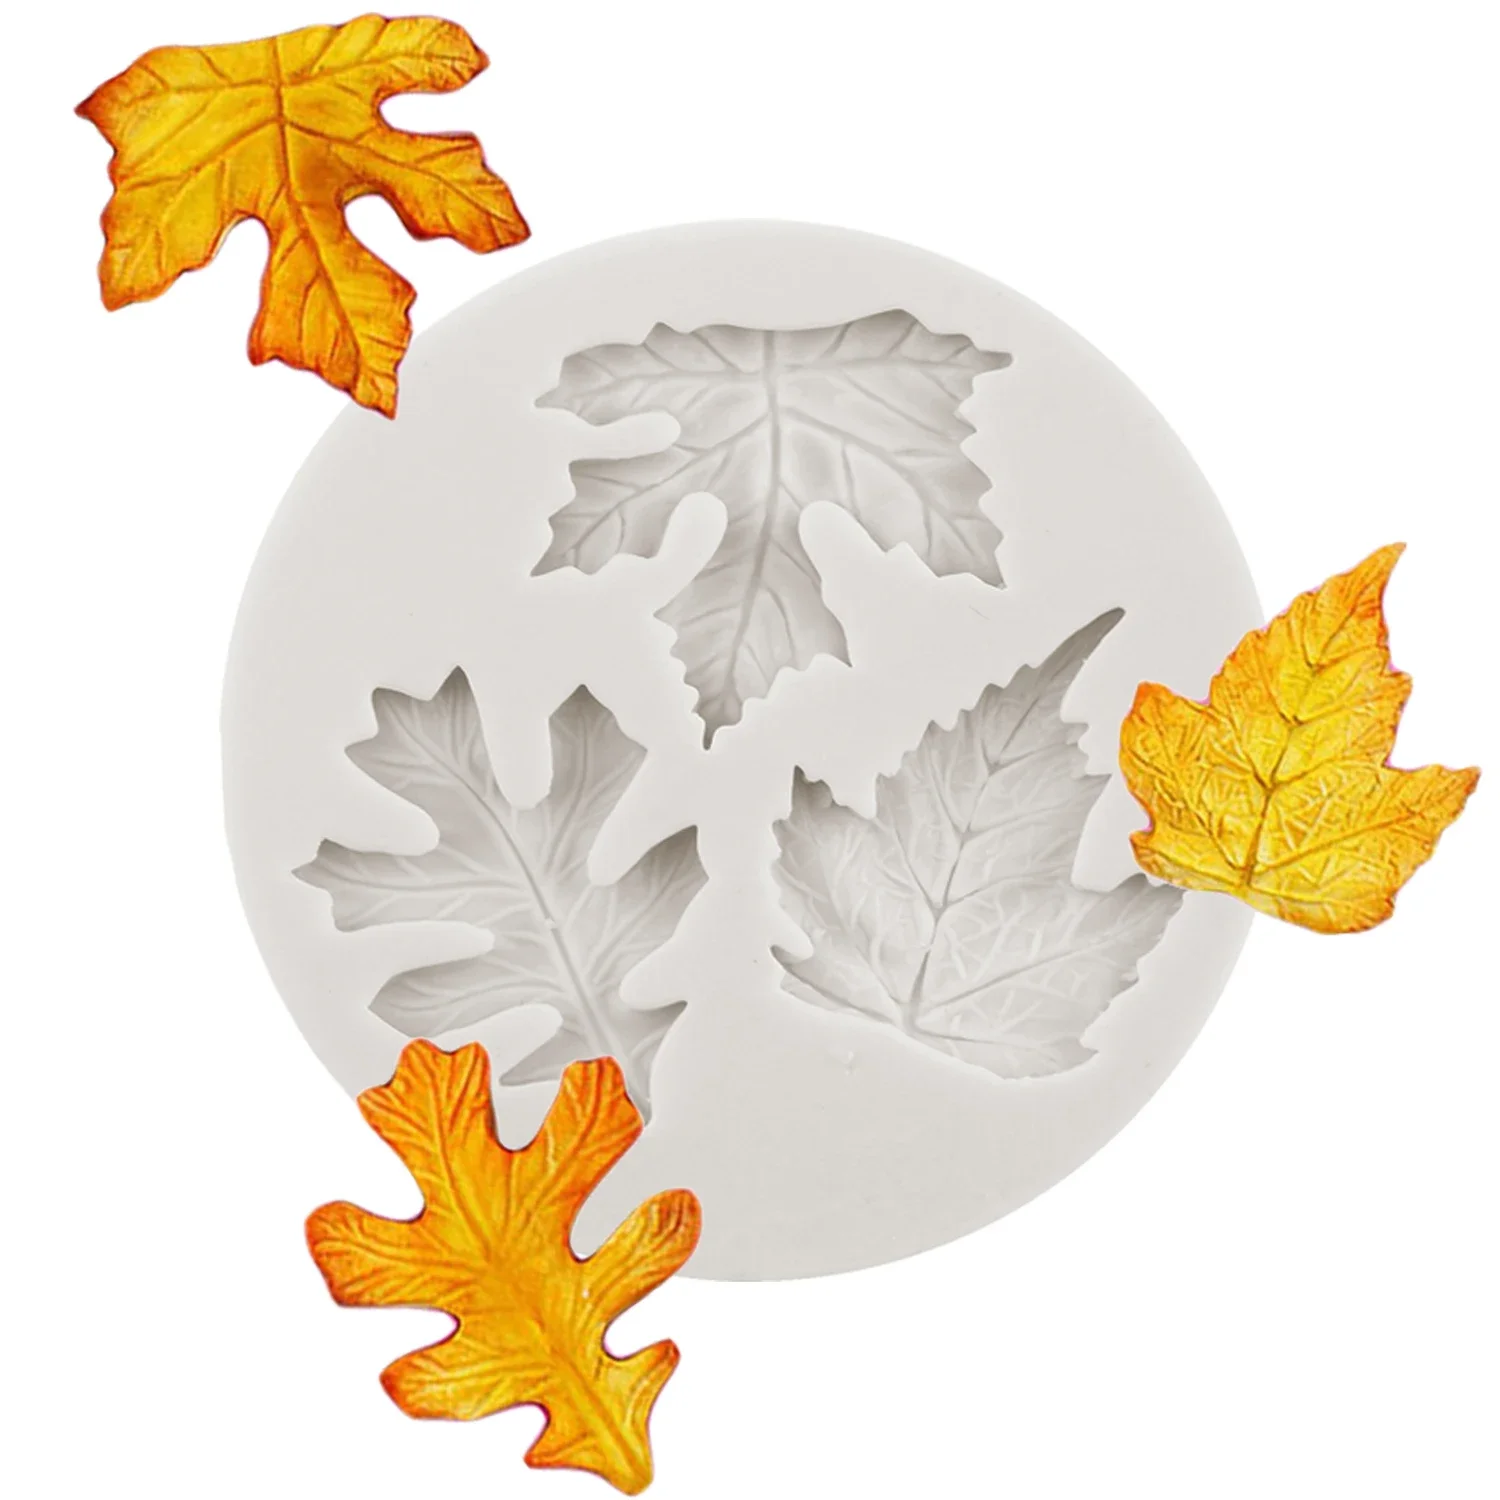 

Maple Leaf Shape Silicone Mold Kitchen Baking Molds Chocolate Pastry Candy Moulds Fondant Cake Decorating Tools